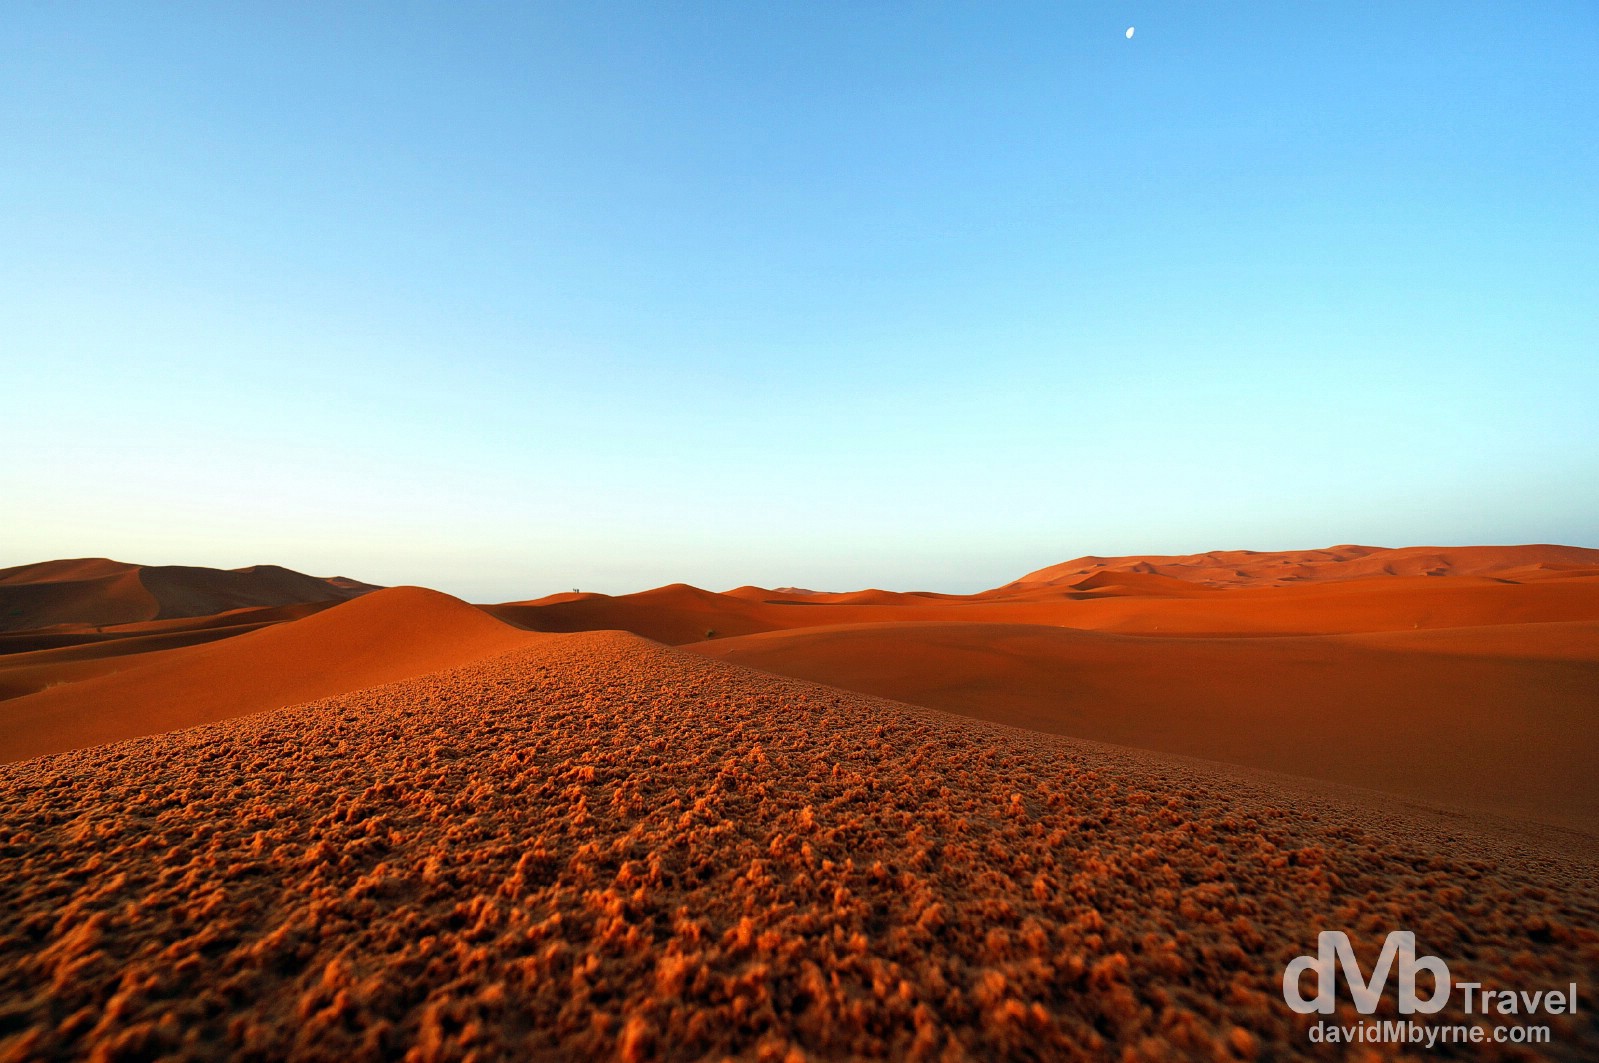 The moon is still in the sky as the sun rises over the red sands of the Erg Chebbi sand dunes in Morocco. May 19th, 2014.